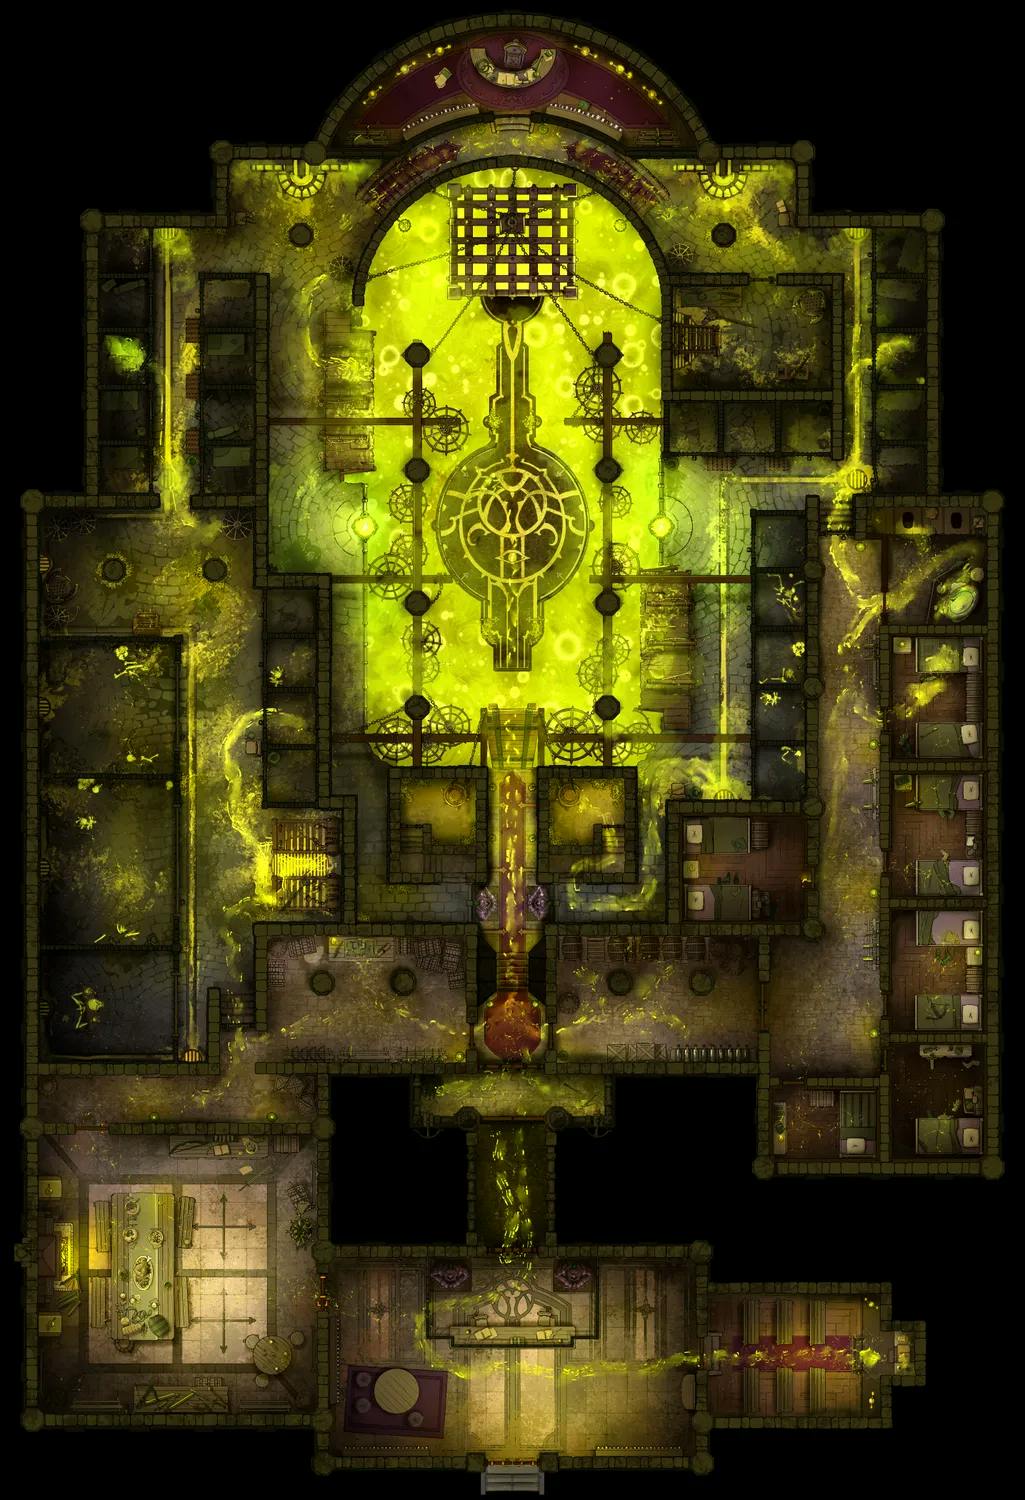 Medieval Jail map, Toxic Lime variant